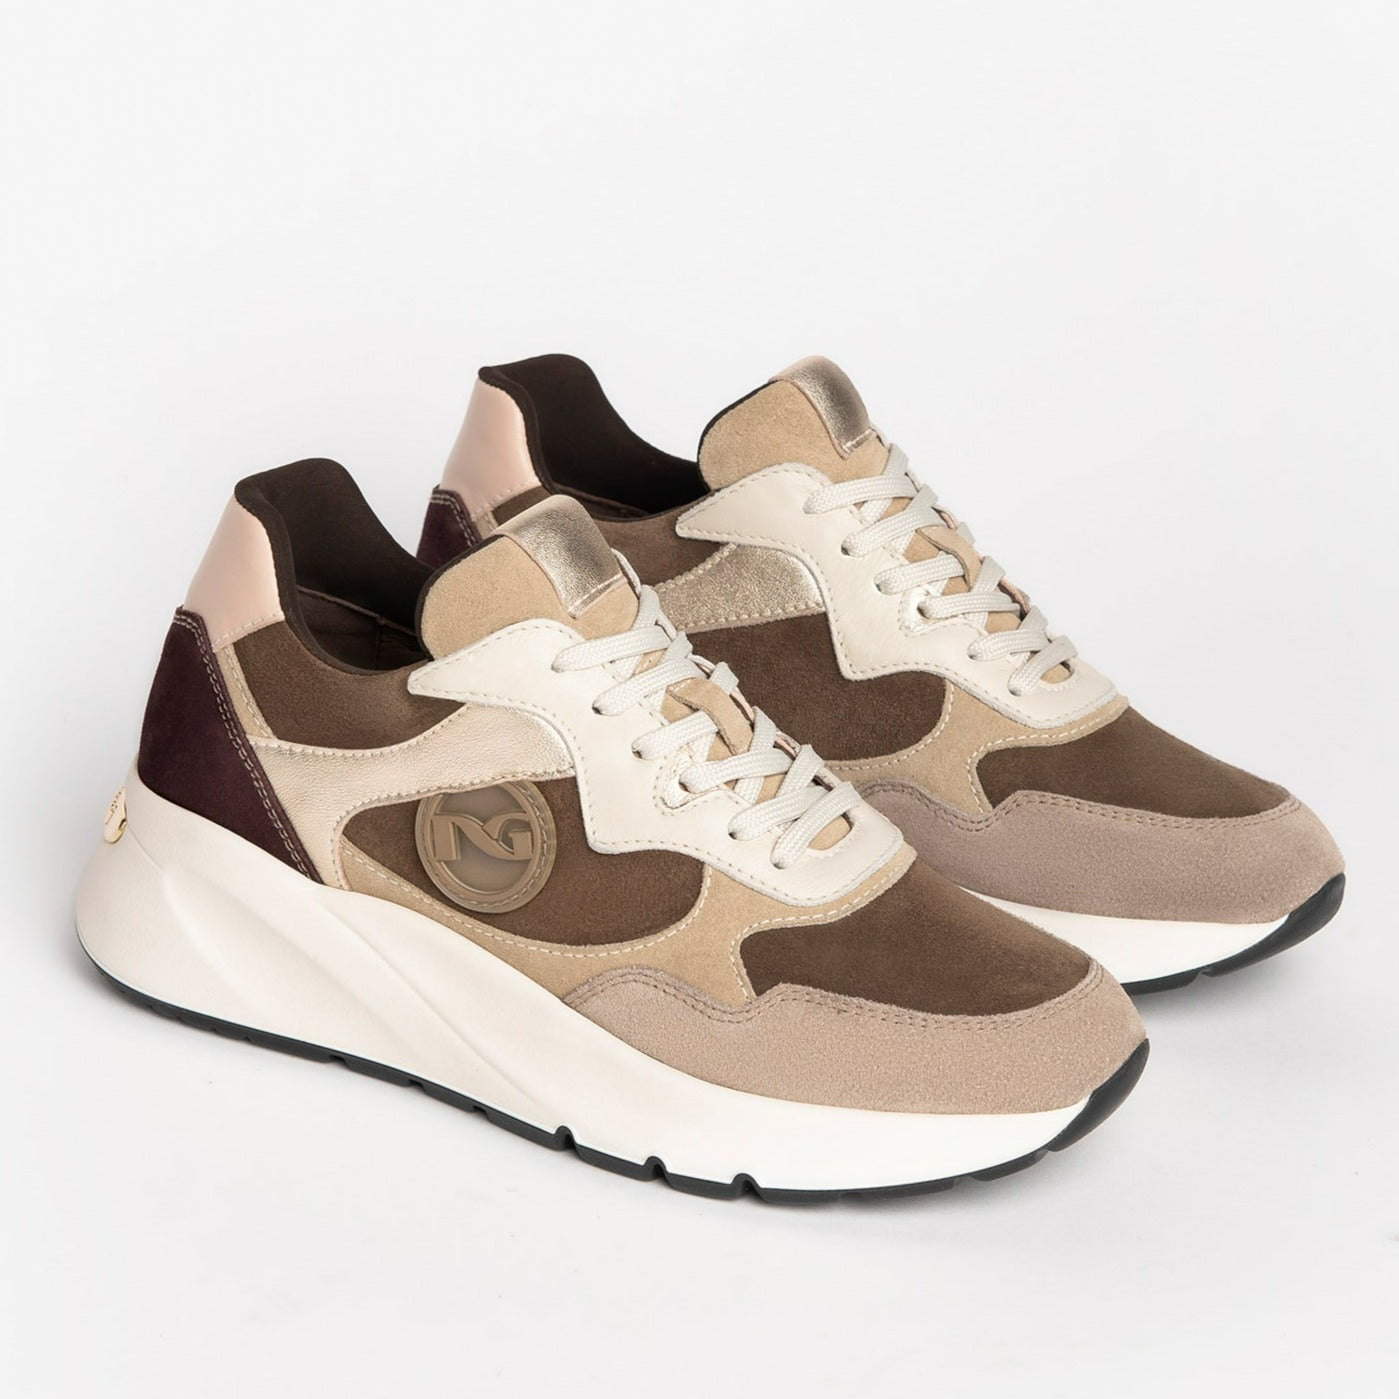 Sneakers NeroGiardini woman brown suede and leather